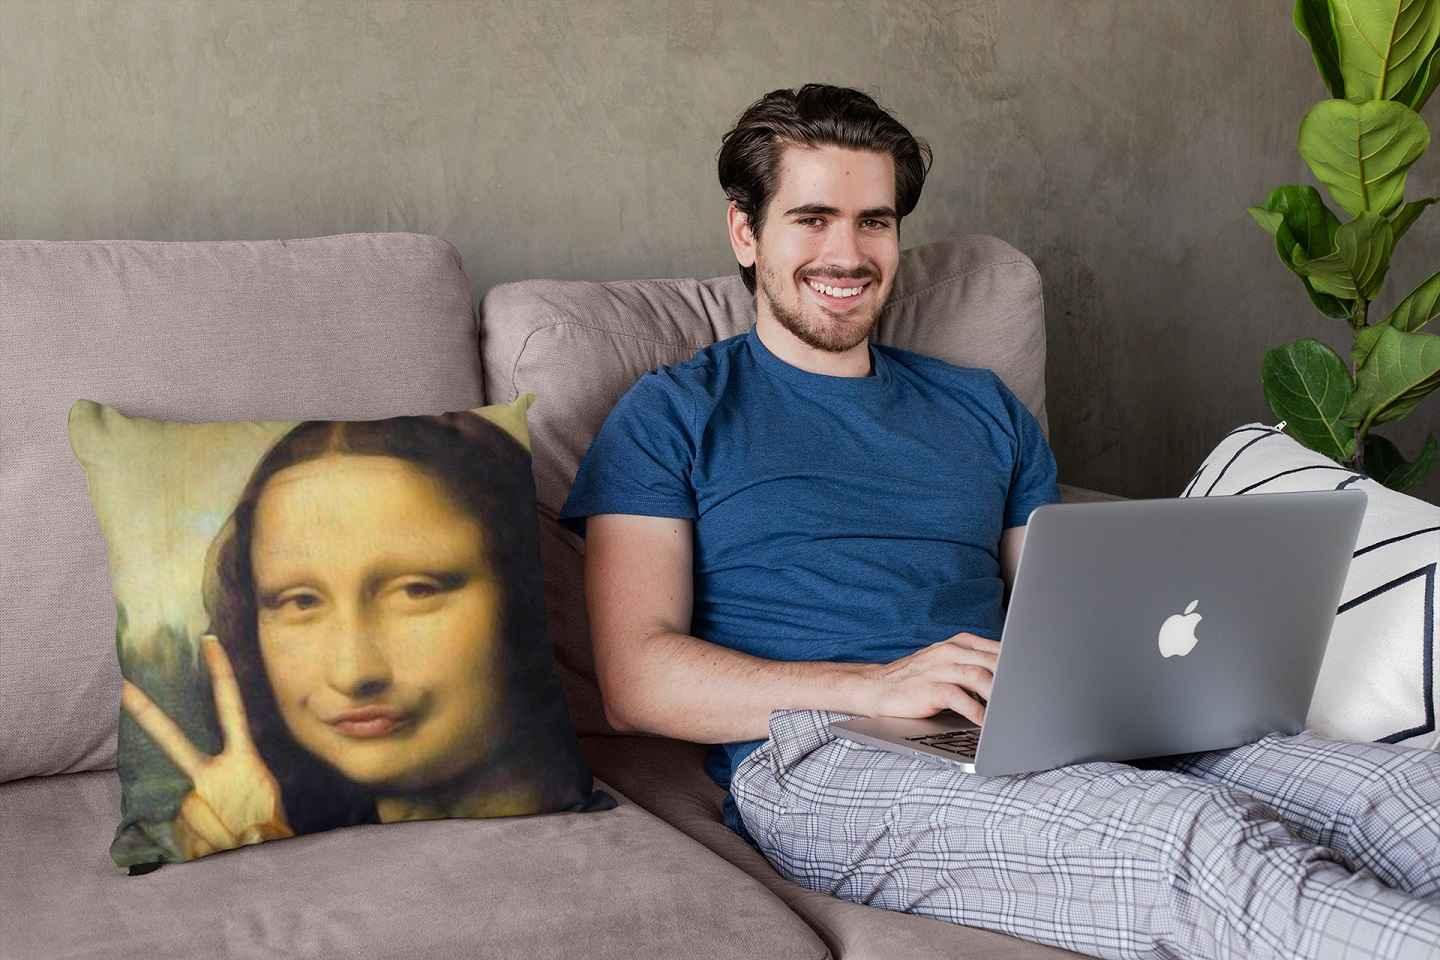 A smiling young man with a laptop sitting next to a Mona Lisa meme.